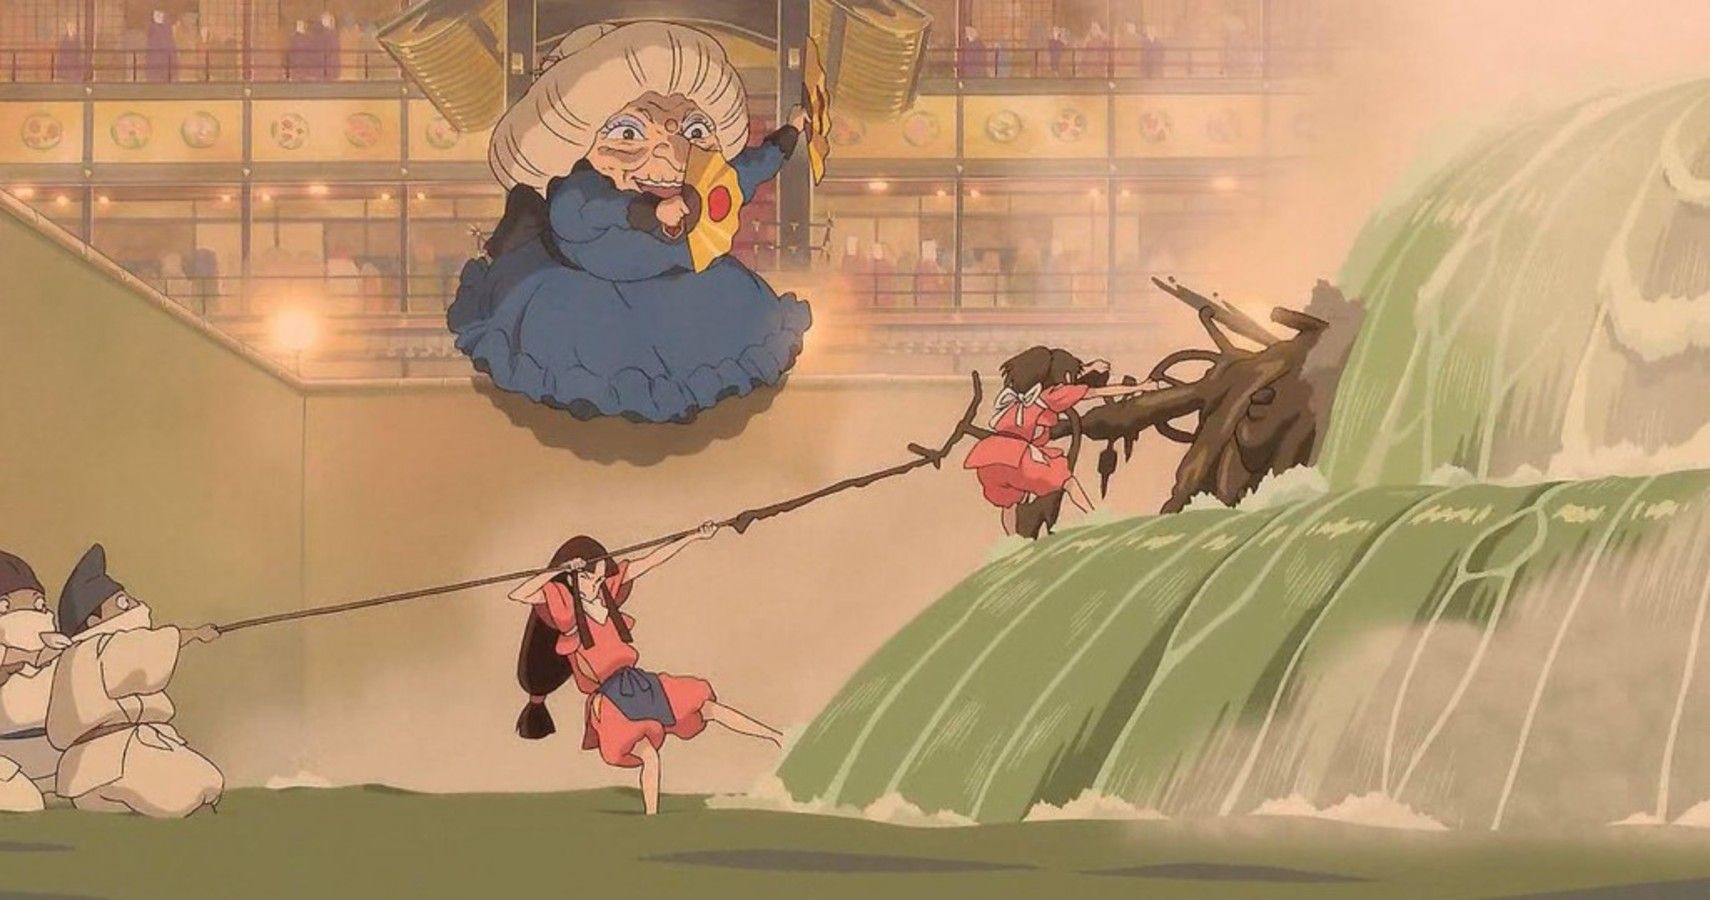 10 Things Only Japanese Fans Notice in Spirited Away